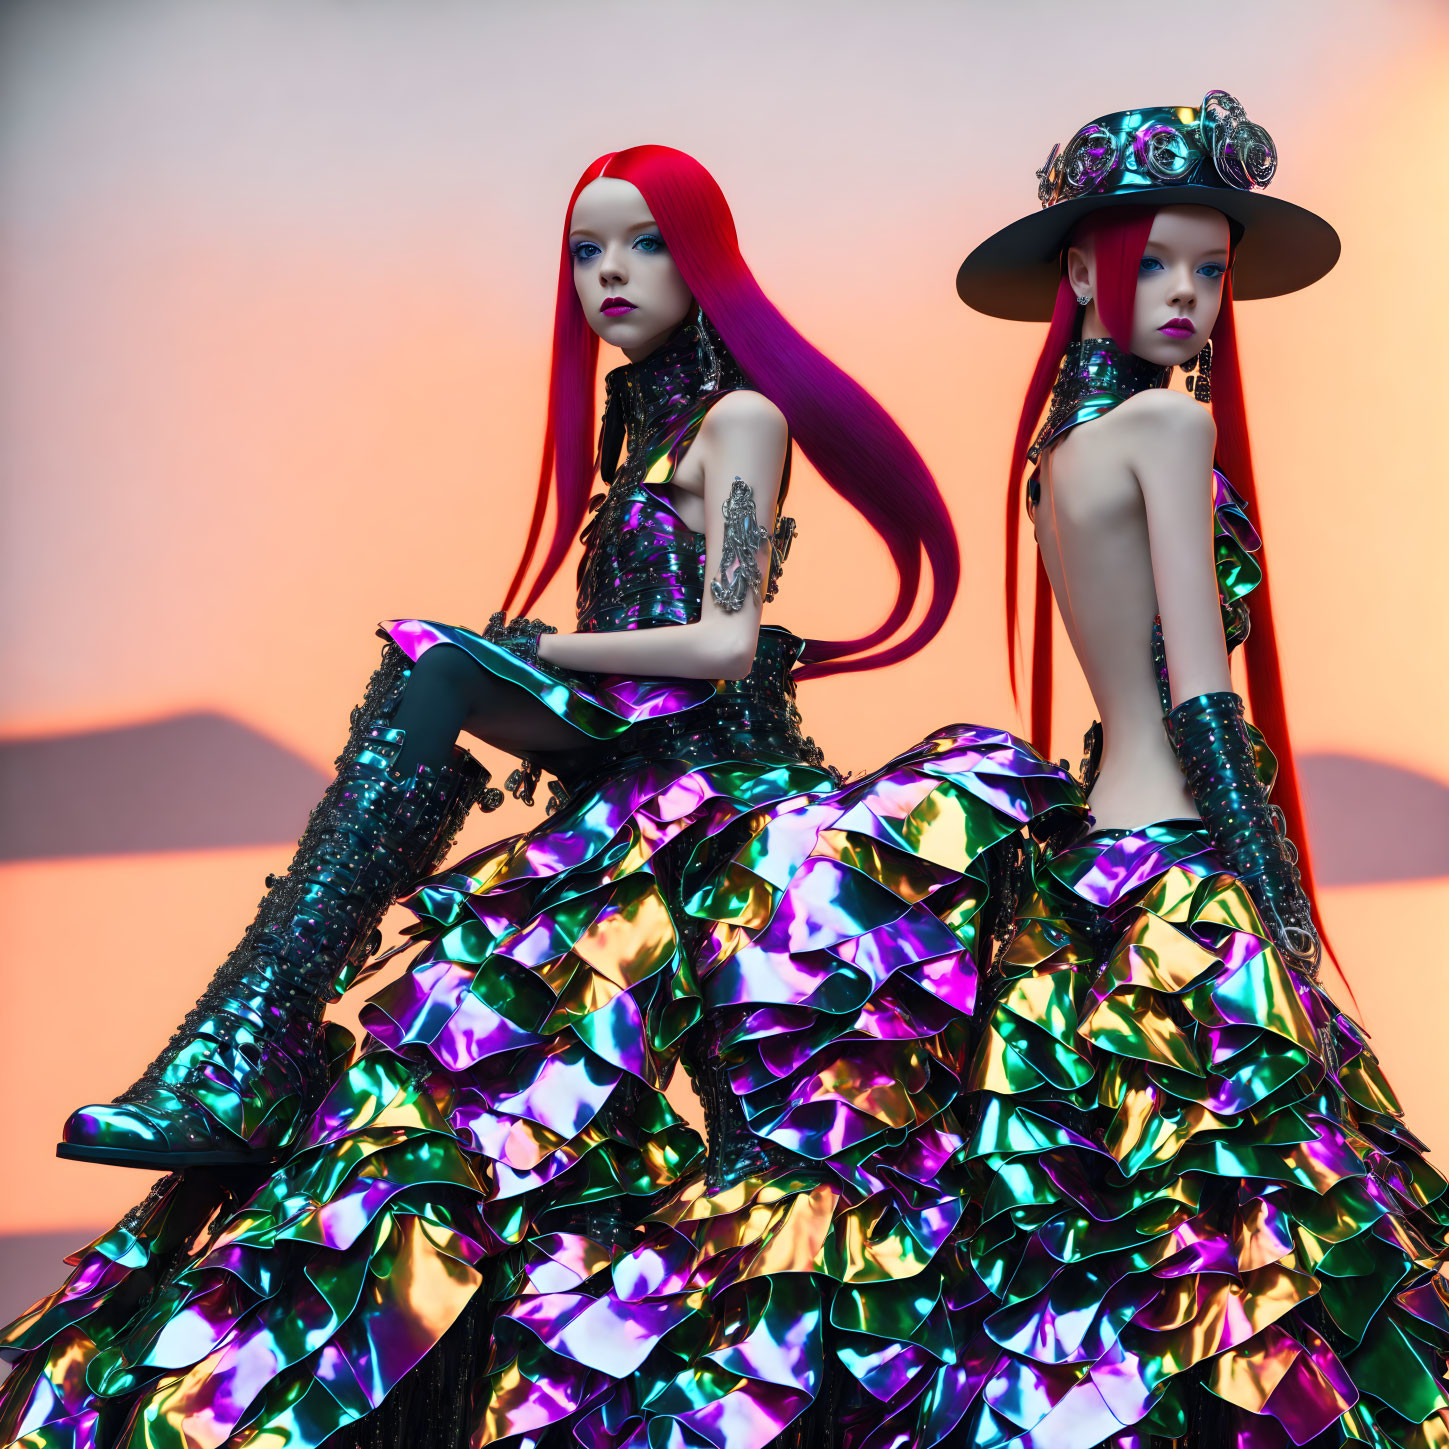 Mannequins with Red Hair in Metallic Dresses on Orange Background